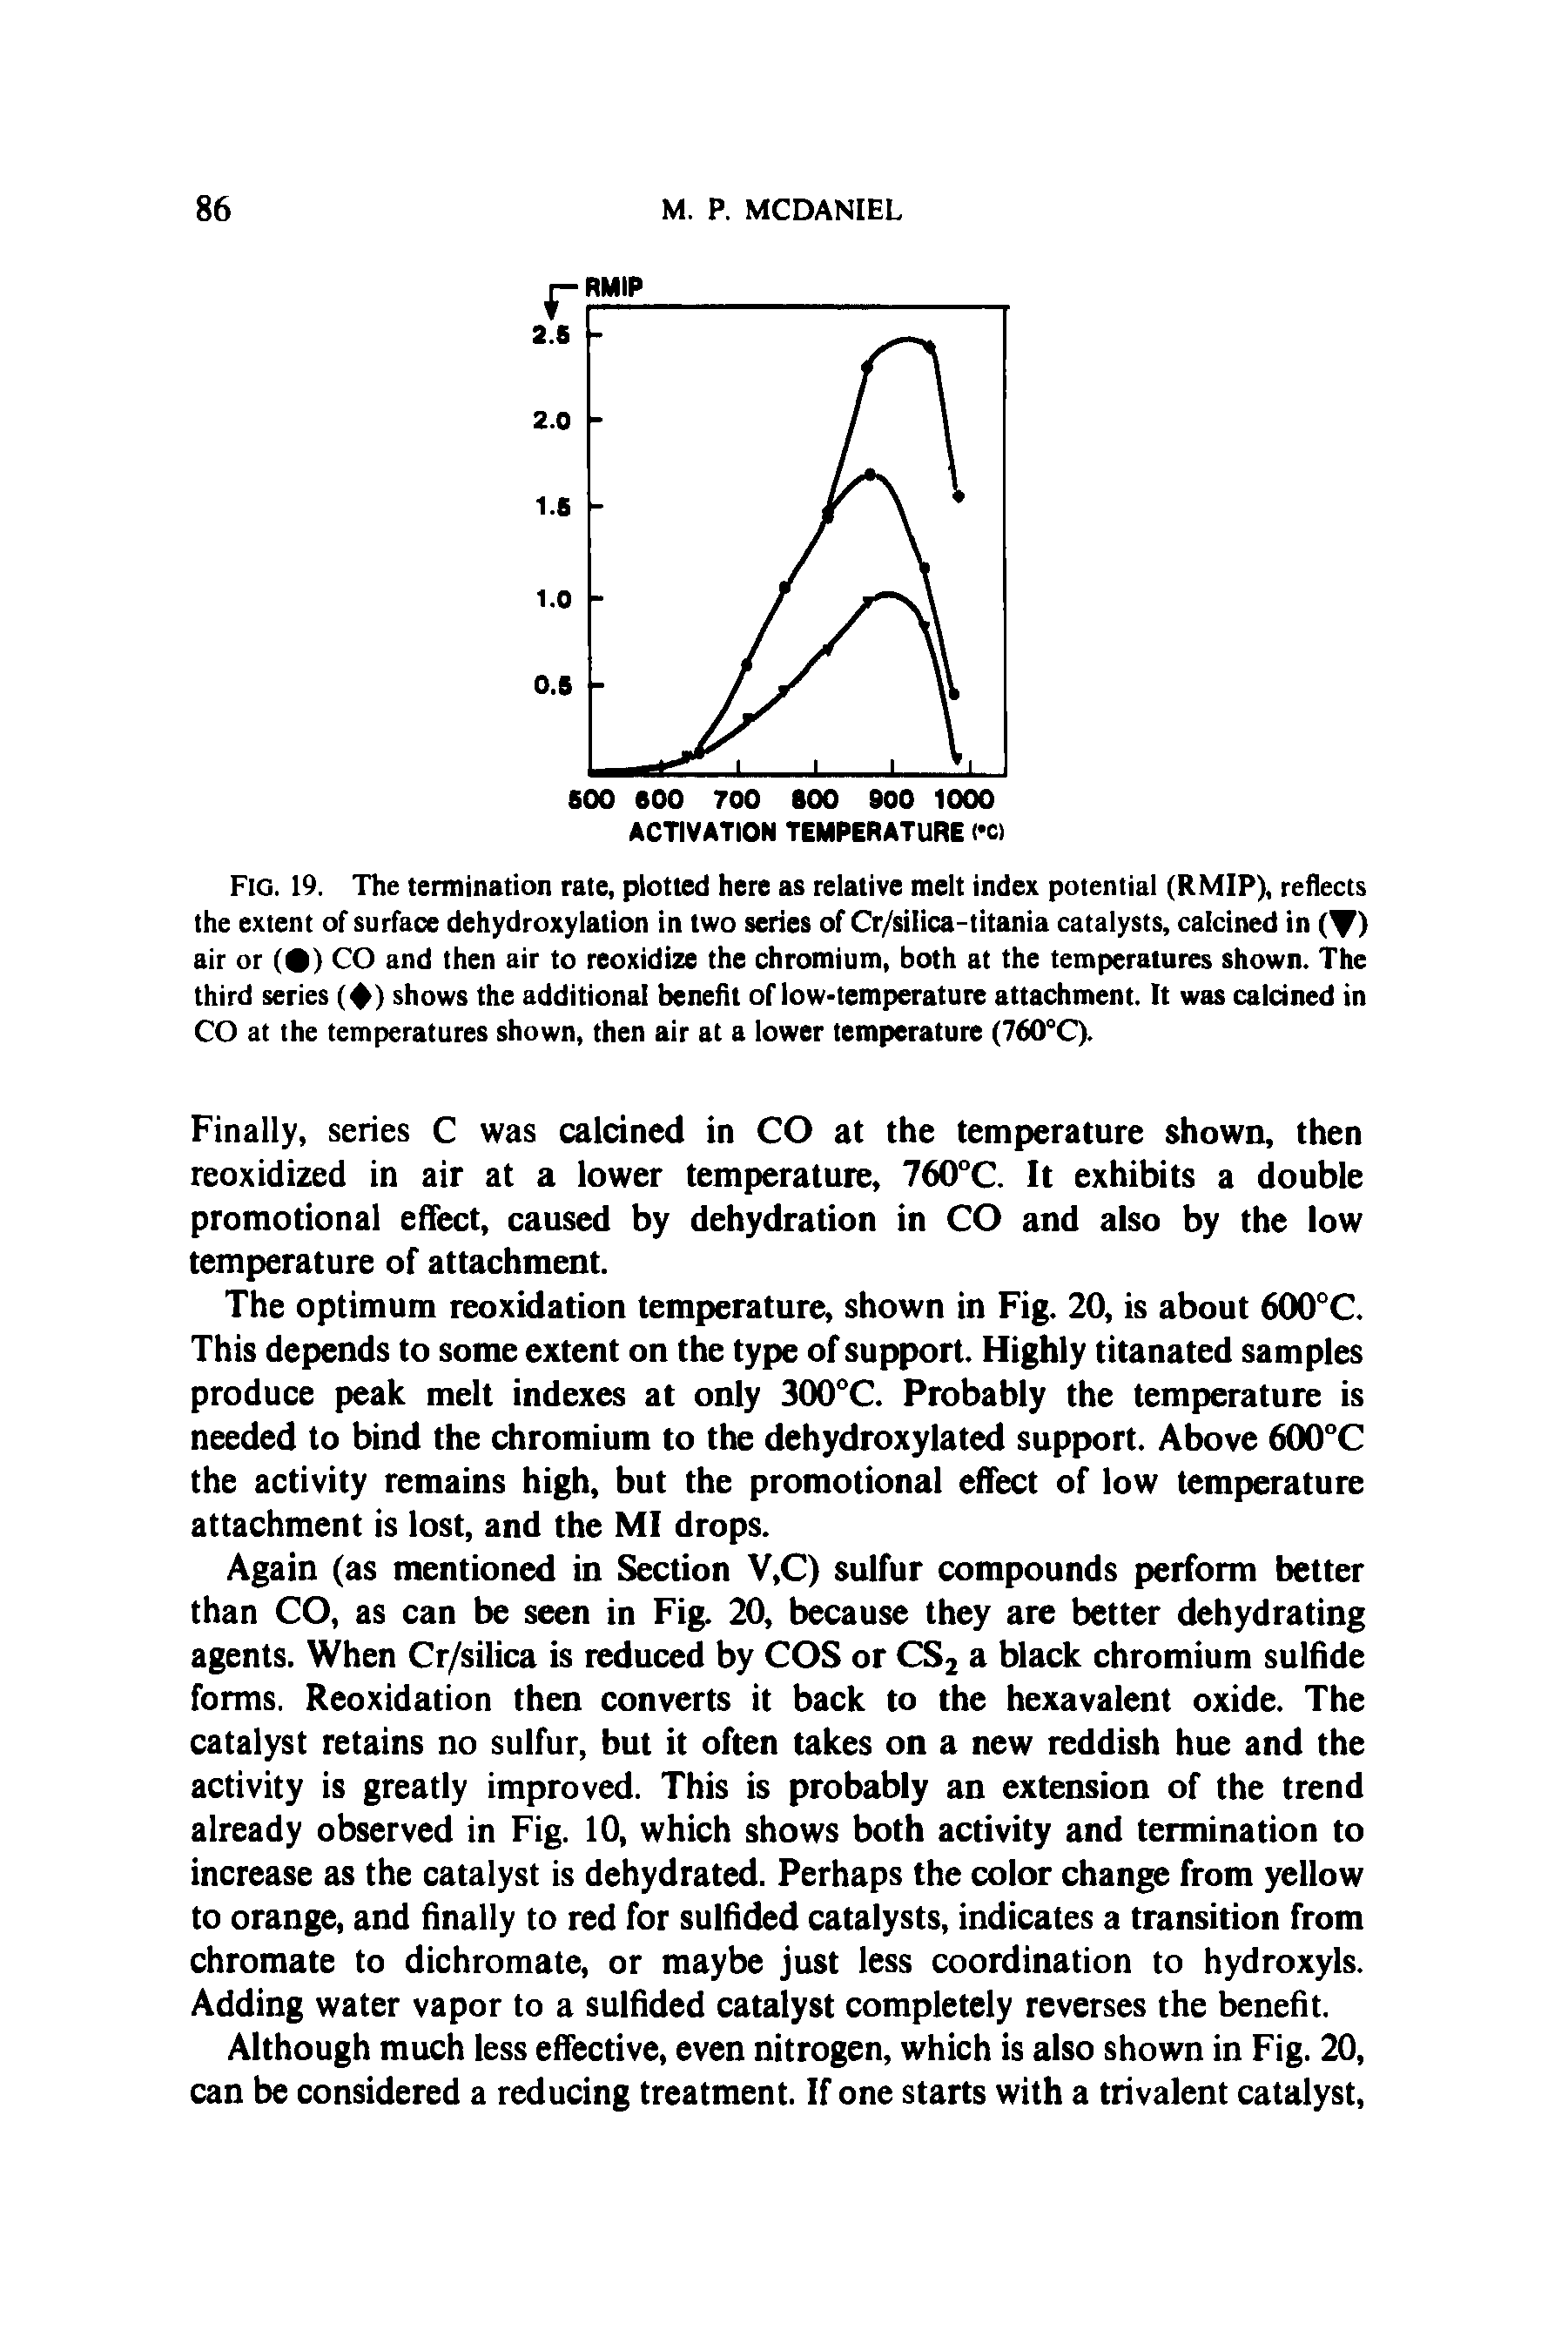 Fig. 19. The termination rate, plotted here as relative melt index potential (RMIP), reflects the extent of surface dehydroxylation in two series of Cr/silica-titania catalysts, calcined in (Y) air or ( ) CO and then air to reoxidize the chromium, both at the temperatures shown. The third series ( ) shows the additional benefit of low-temperature attachment. It was calcined in CO at the temperatures shown, then air at a lower temperature (760°C).